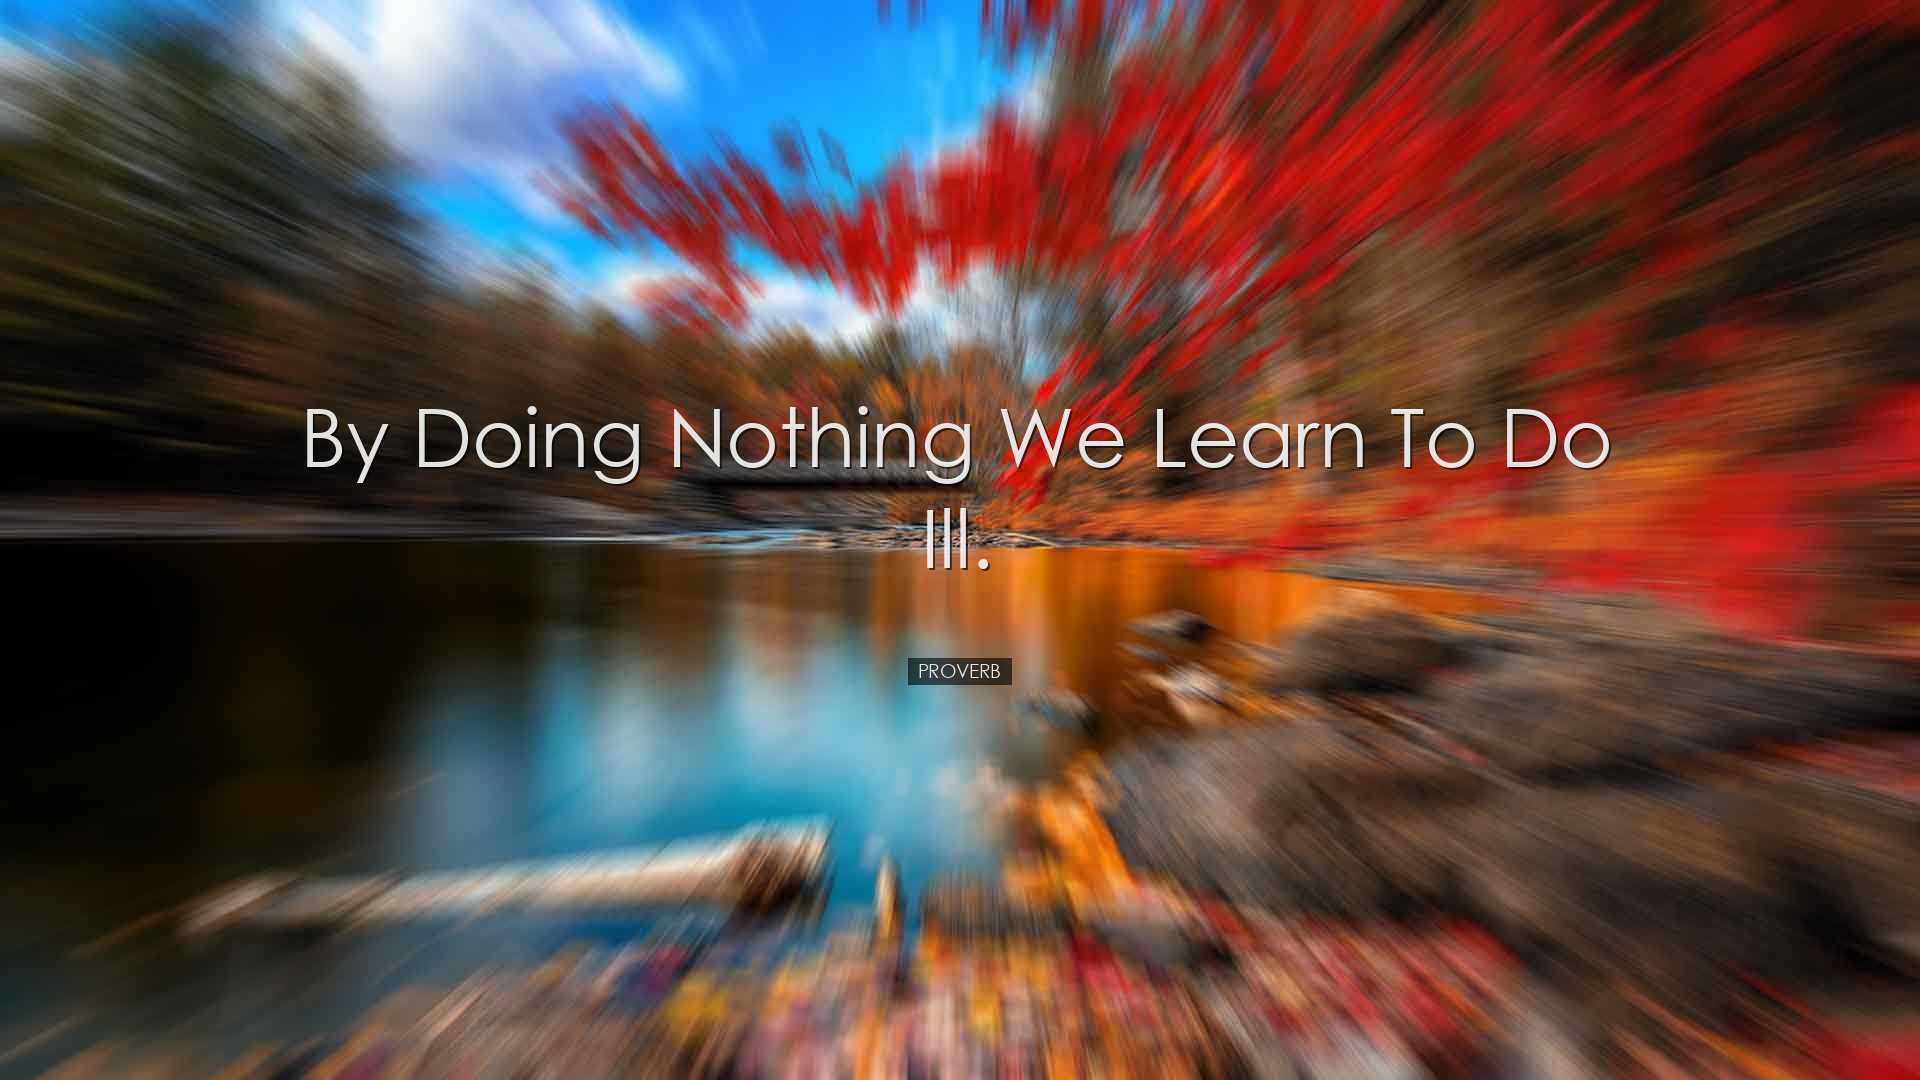 By doing nothing we learn to do ill. - Proverb